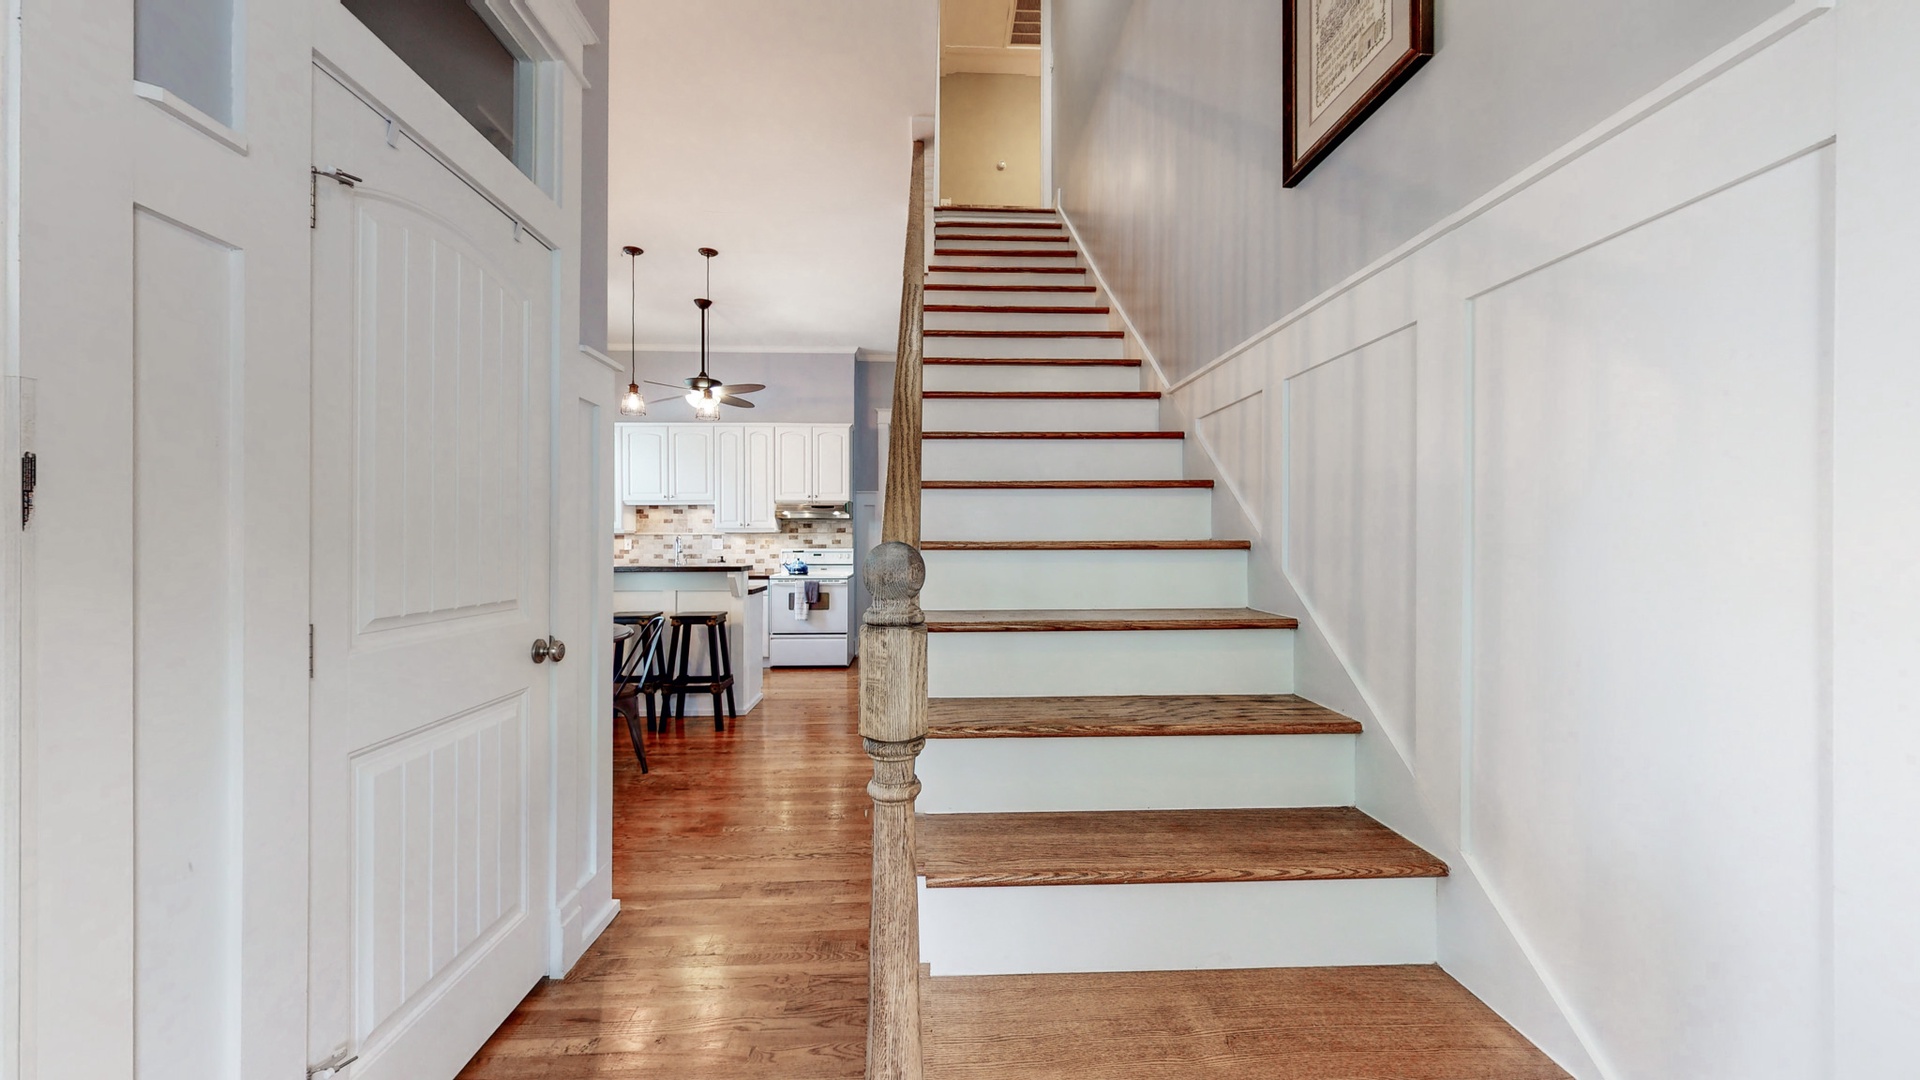 Staircase to upstairs bedrooms